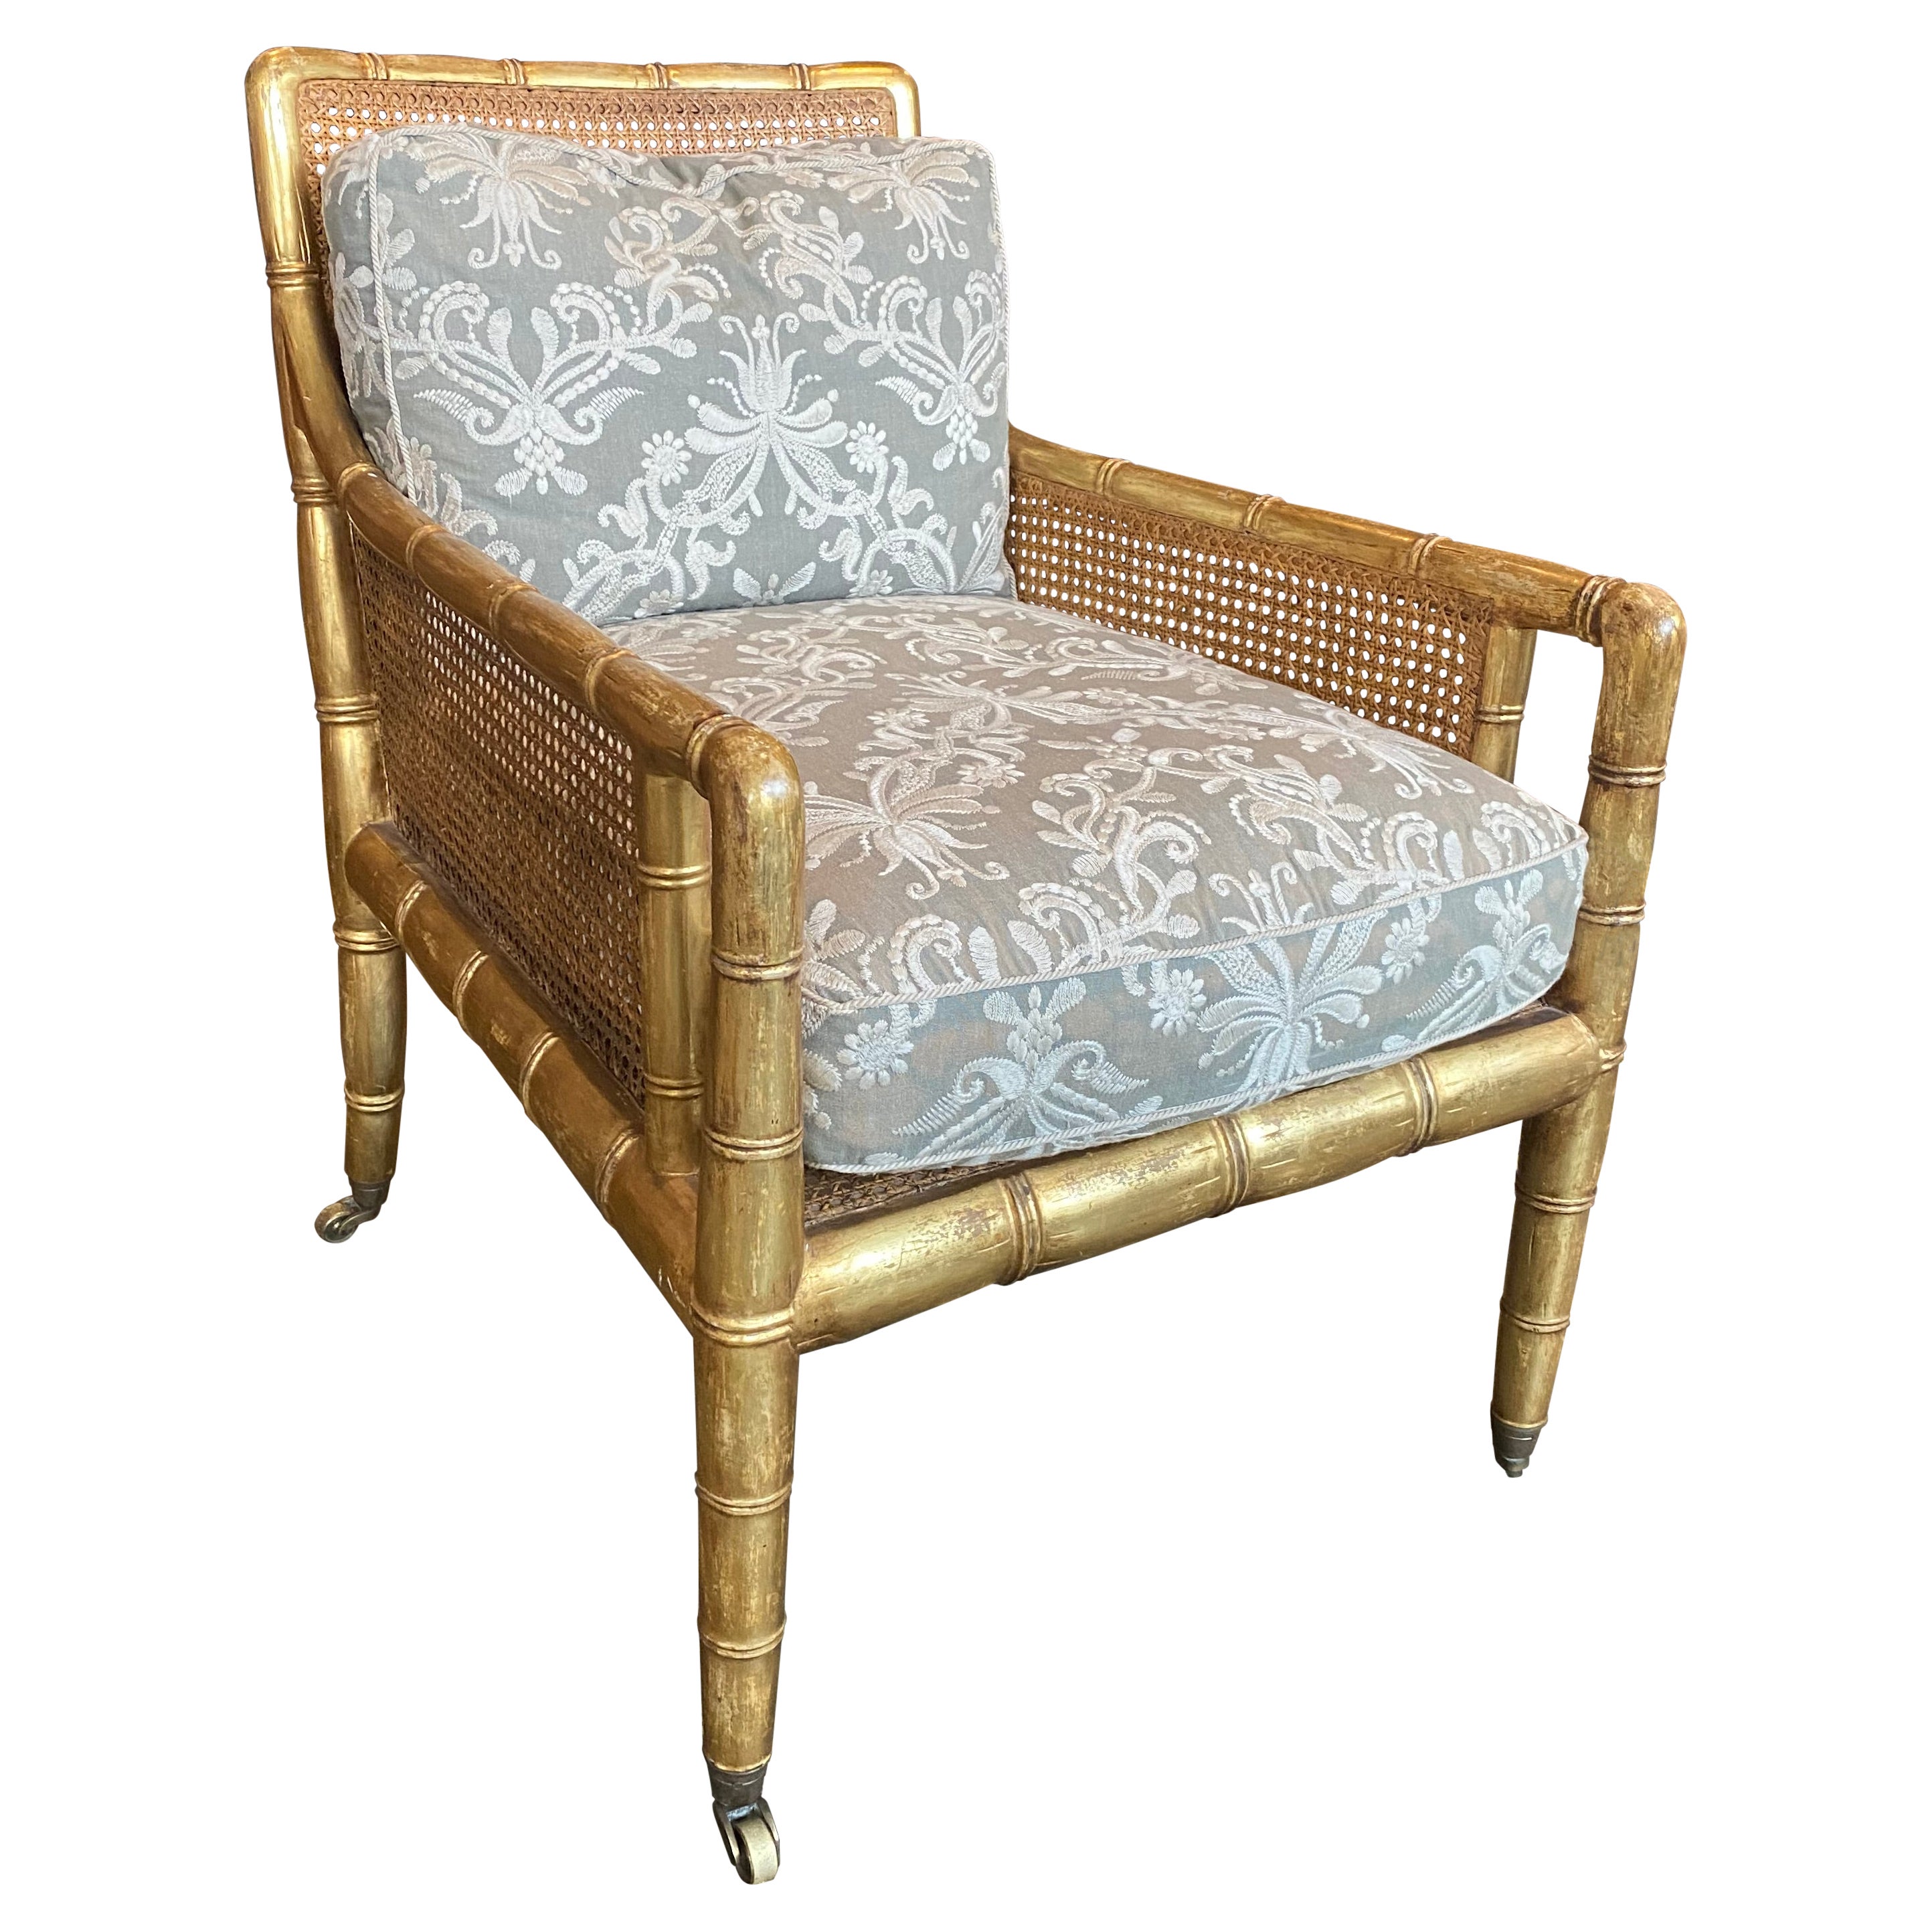 Reproduction Regency Gilt Bamboo Caned Bergere